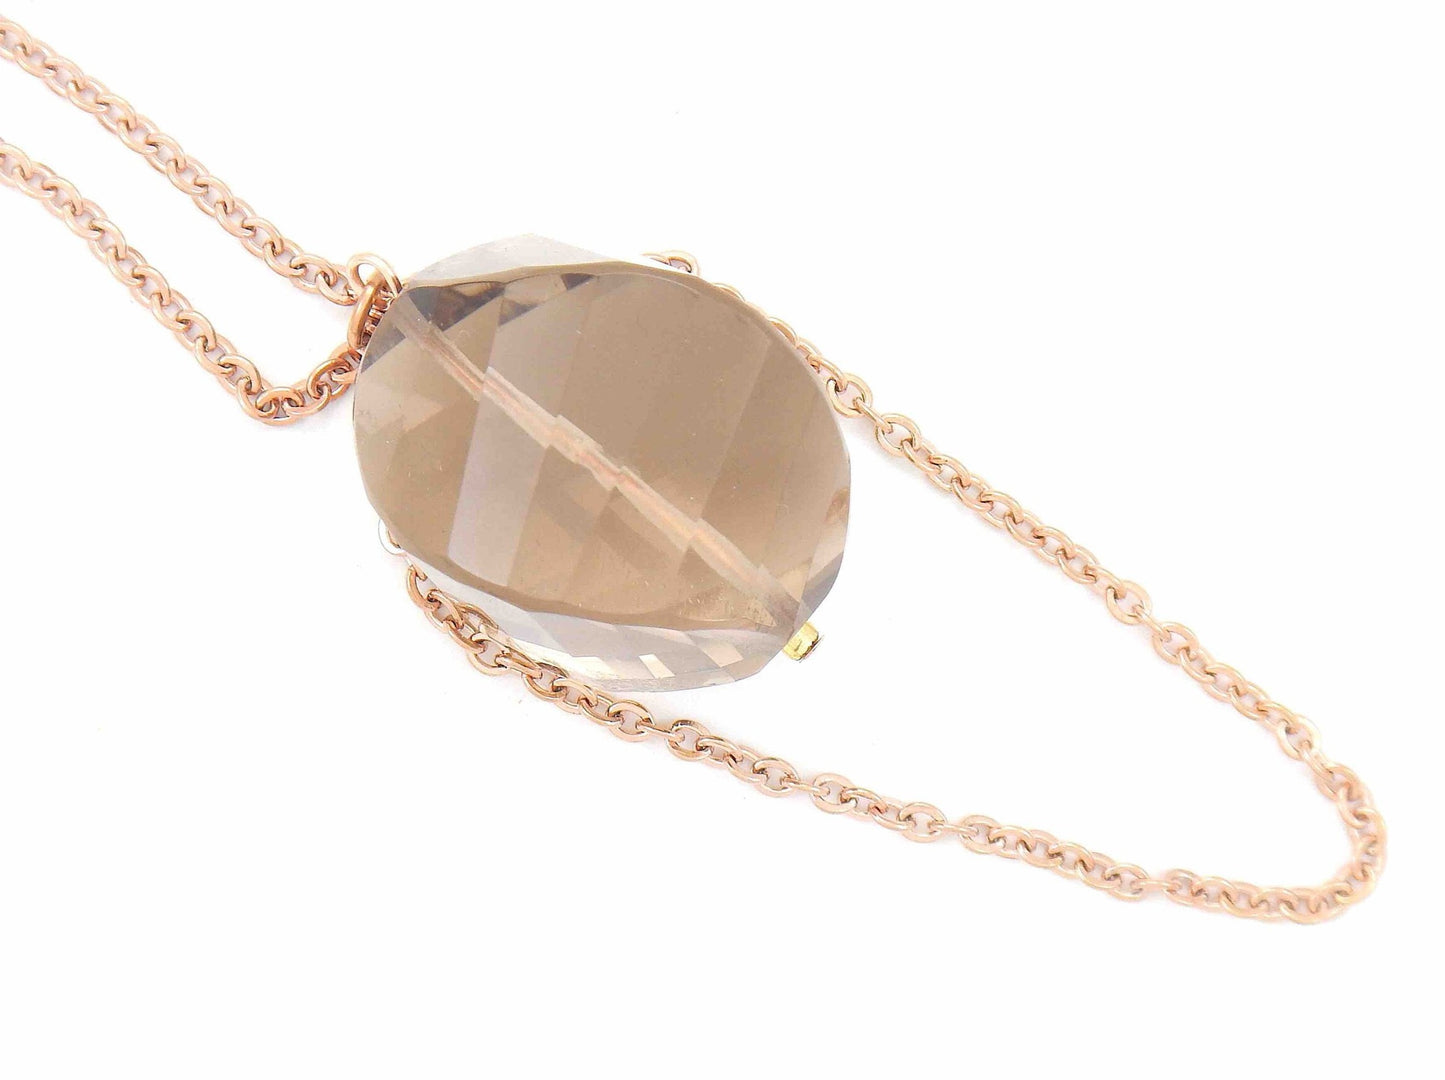 31-inch necklace with smoky quartz stone pendant, 4 profiled and faceted faces, rose gold-toned stainless steel chain